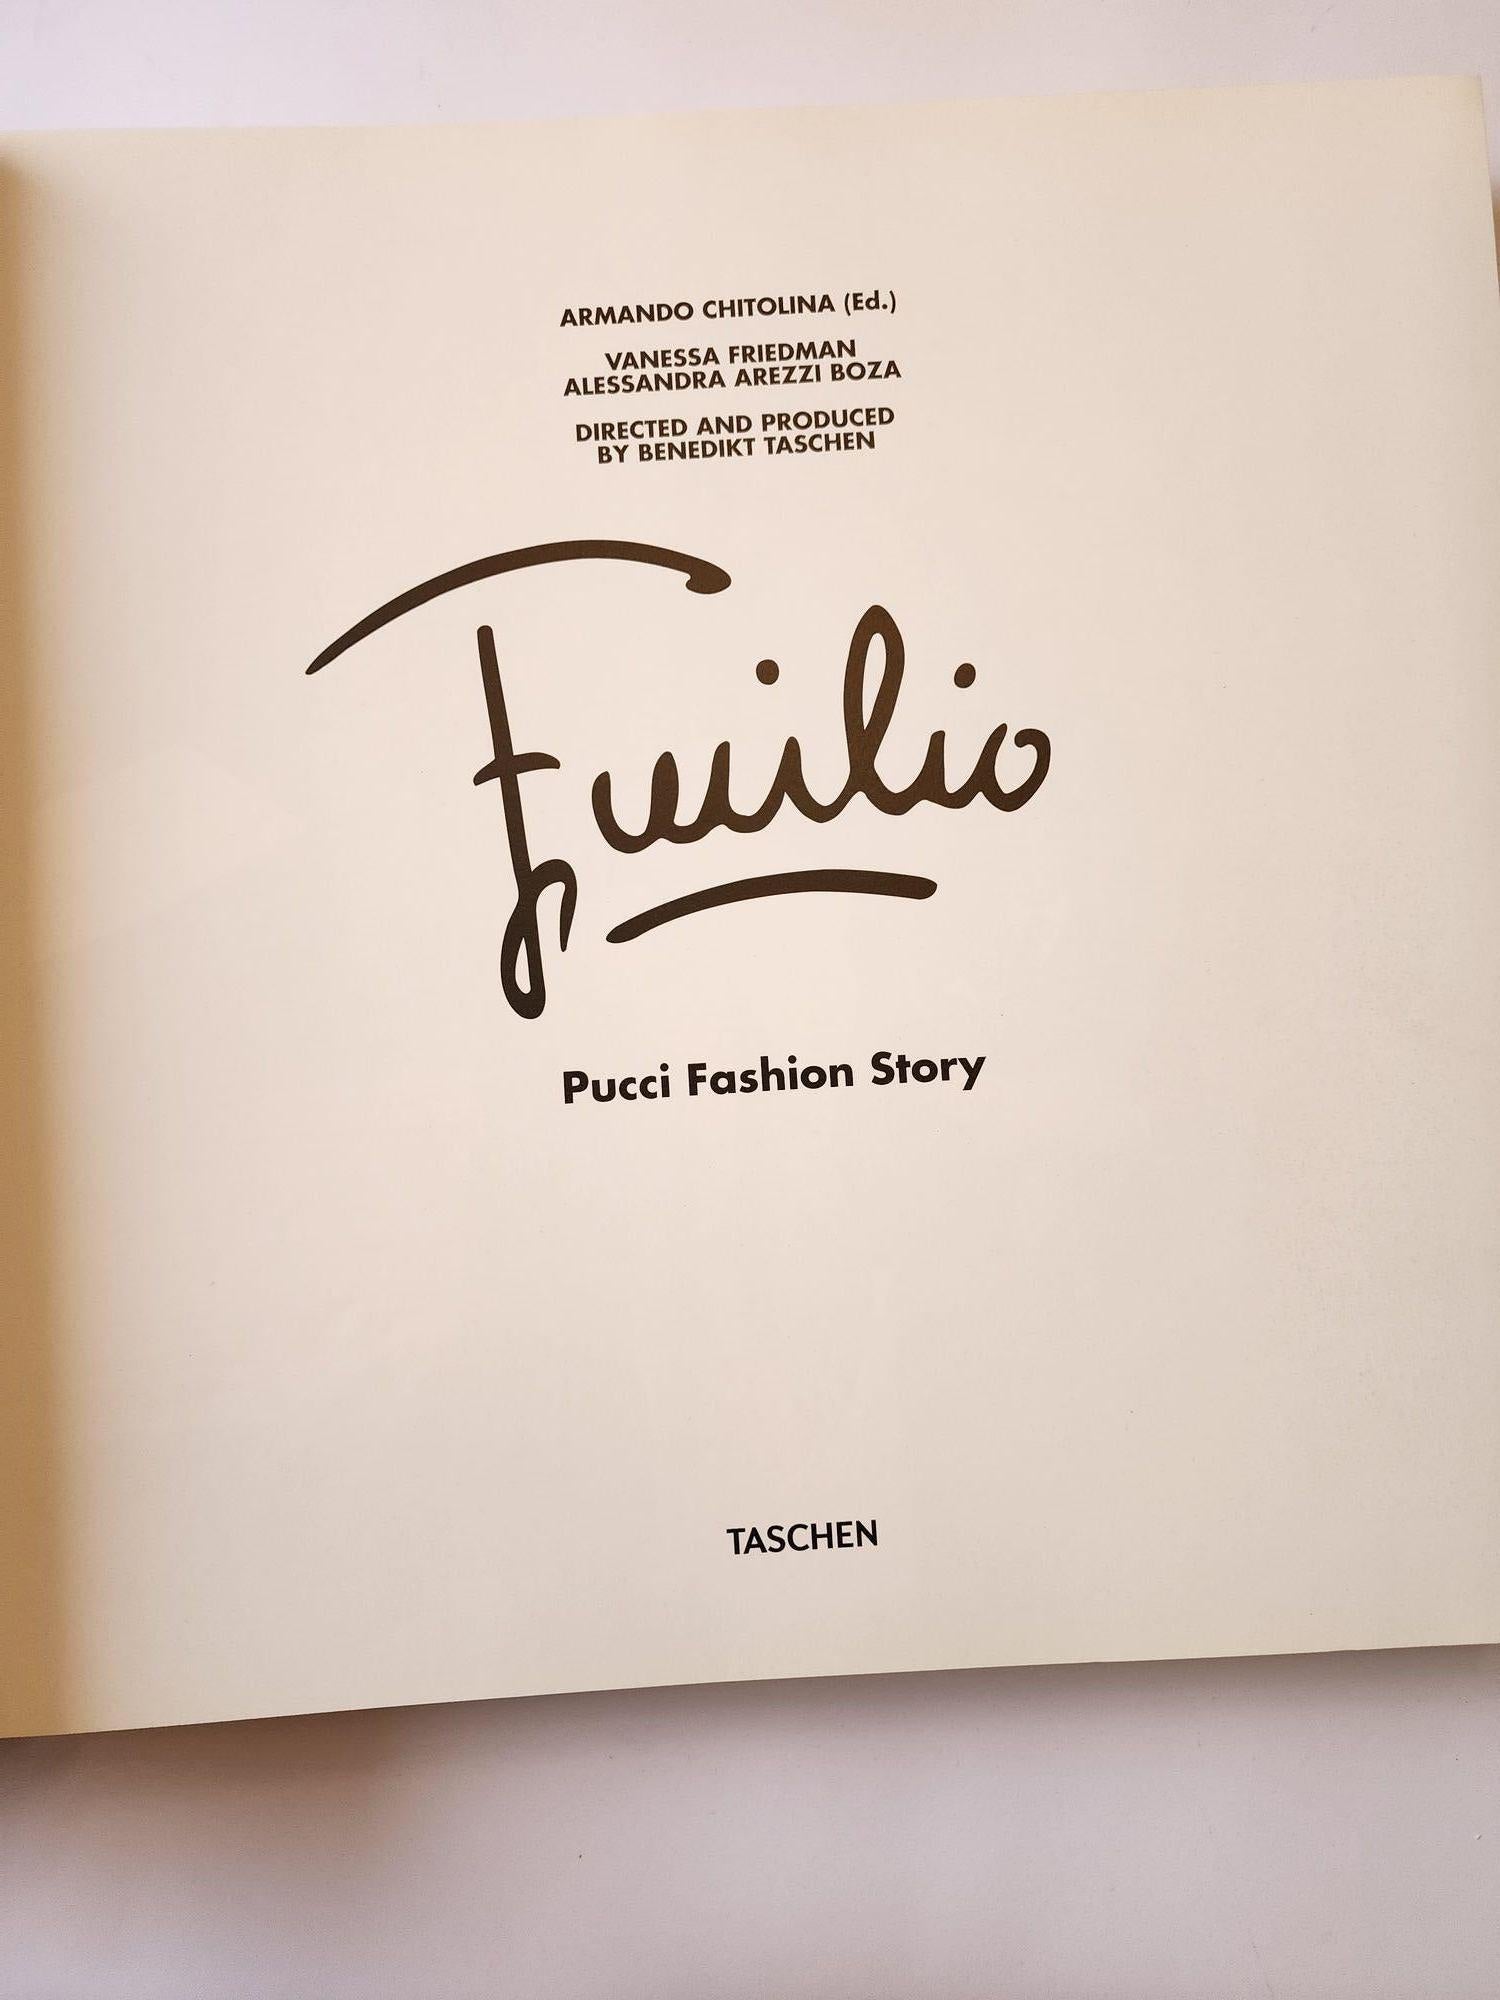 Emilio Pucci Fashion Story Oversized Book by Vanessa Friedman Taschen 2010 For Sale 3